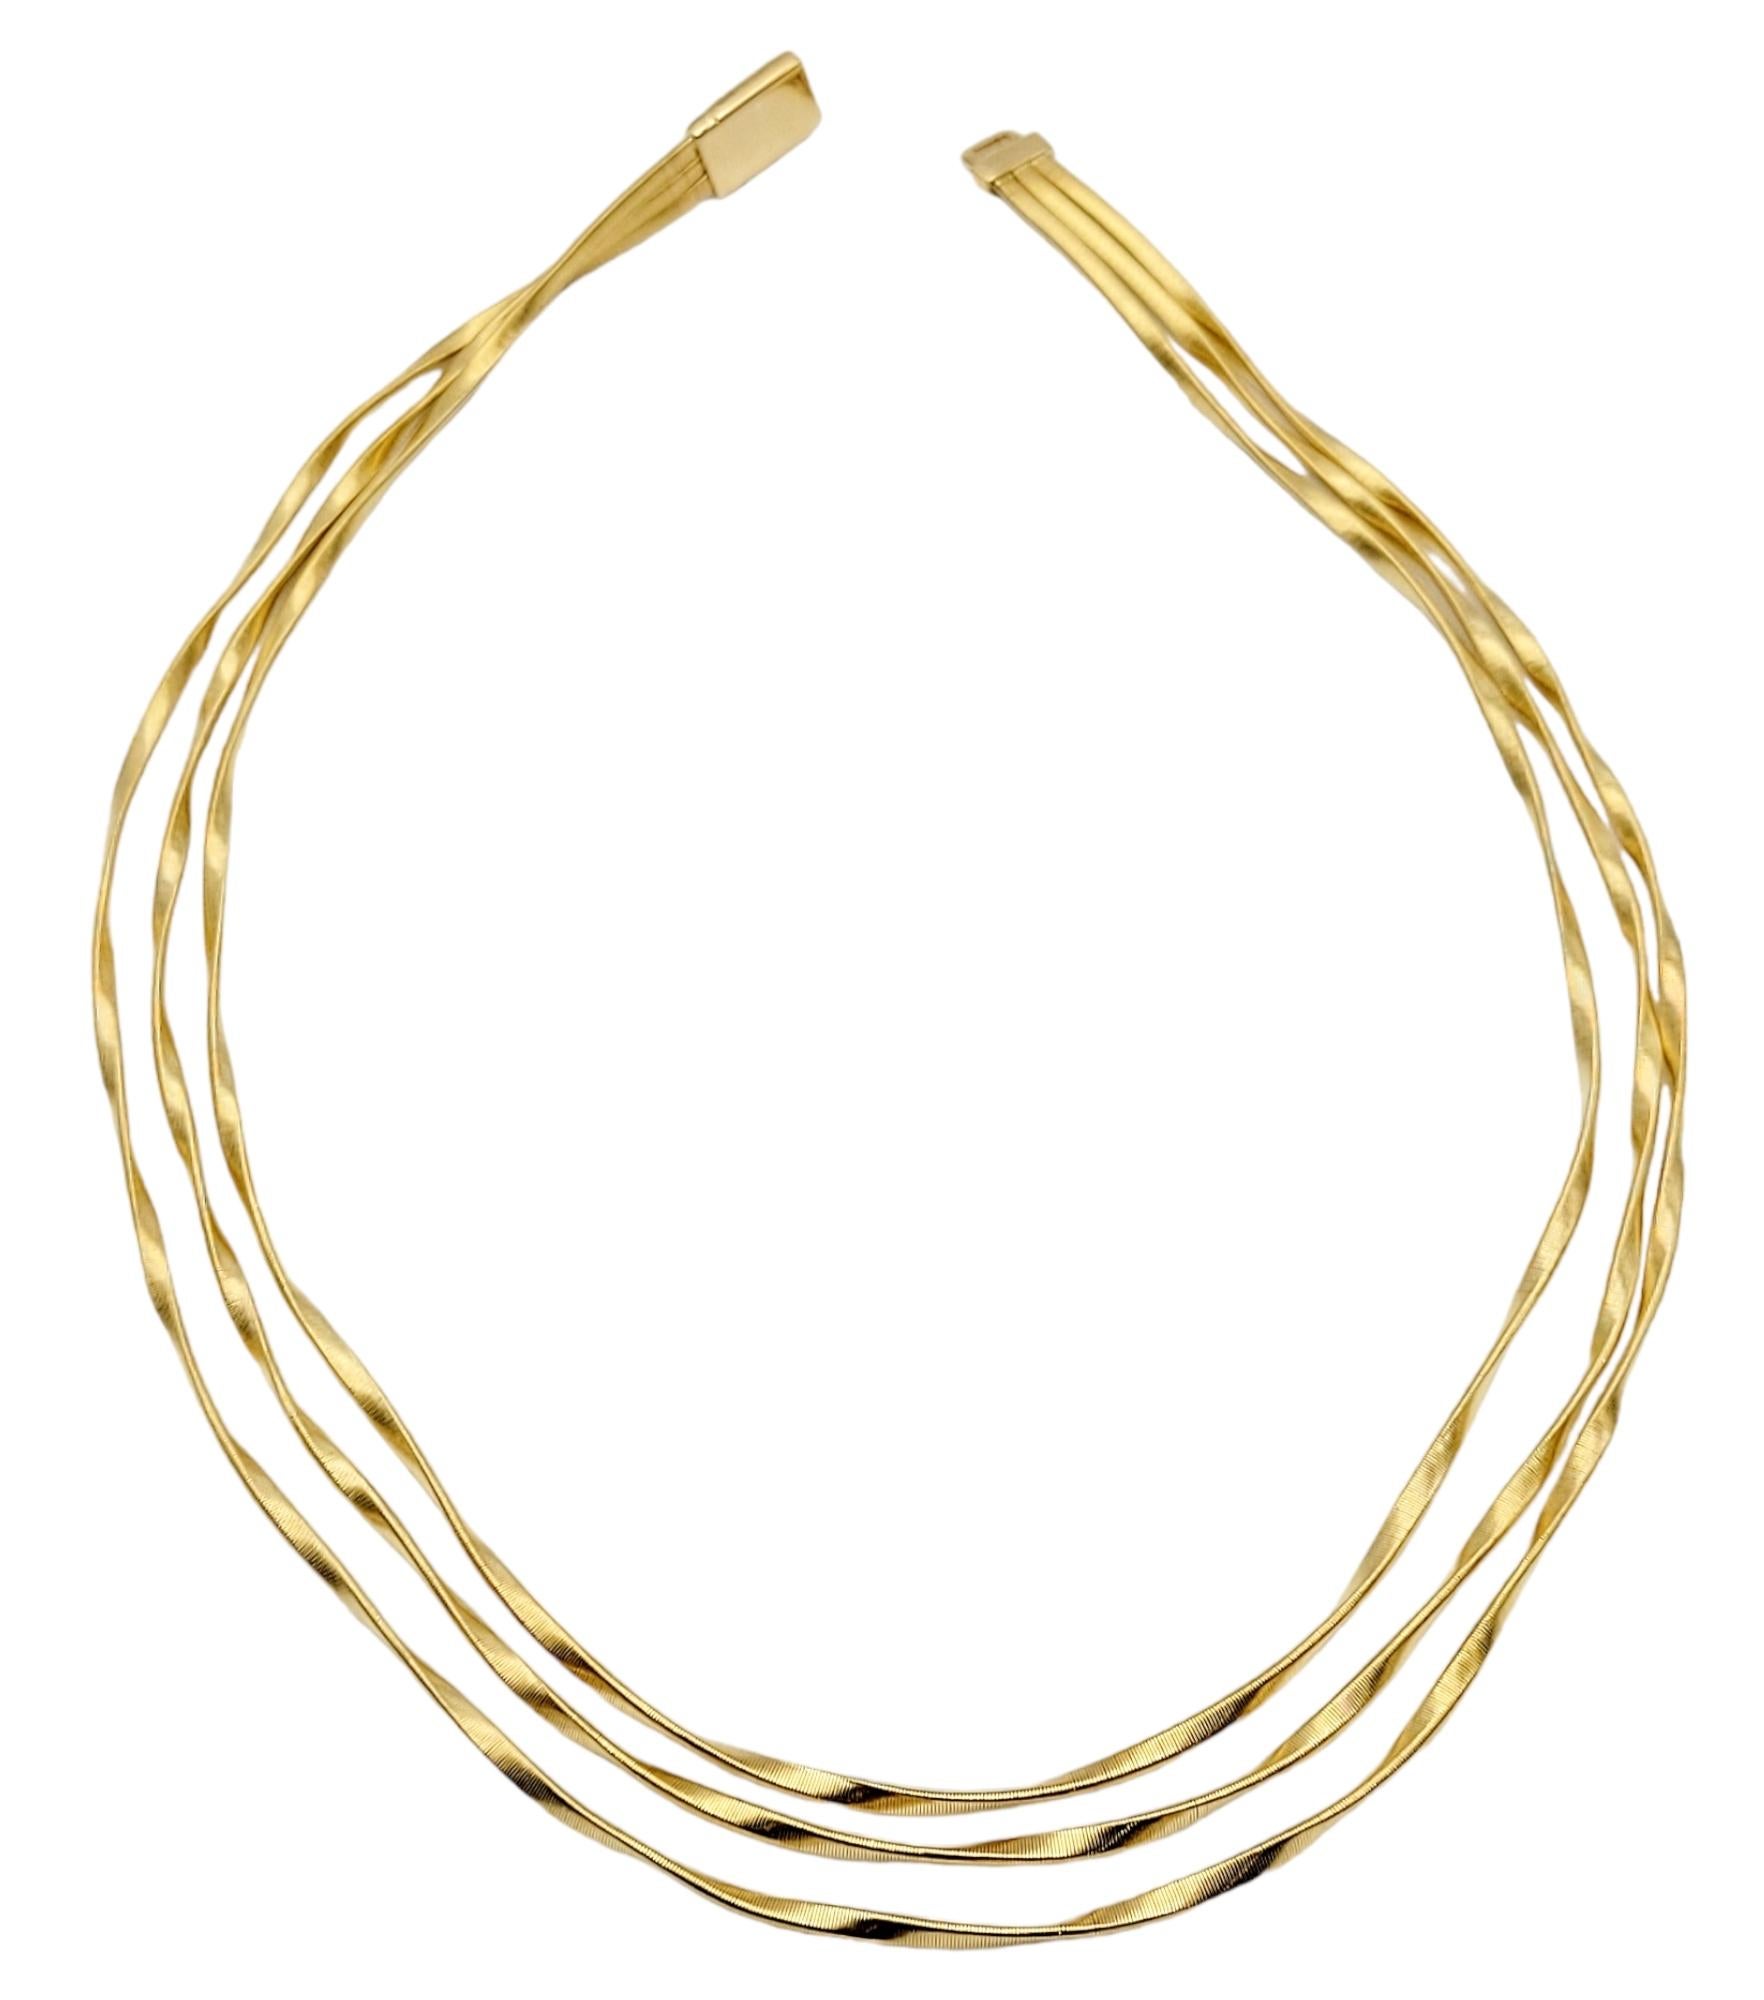 MarCo Bicego Marrakech Collection Three-Strand Necklace in 18 Karat Yellow Gold For Sale 4